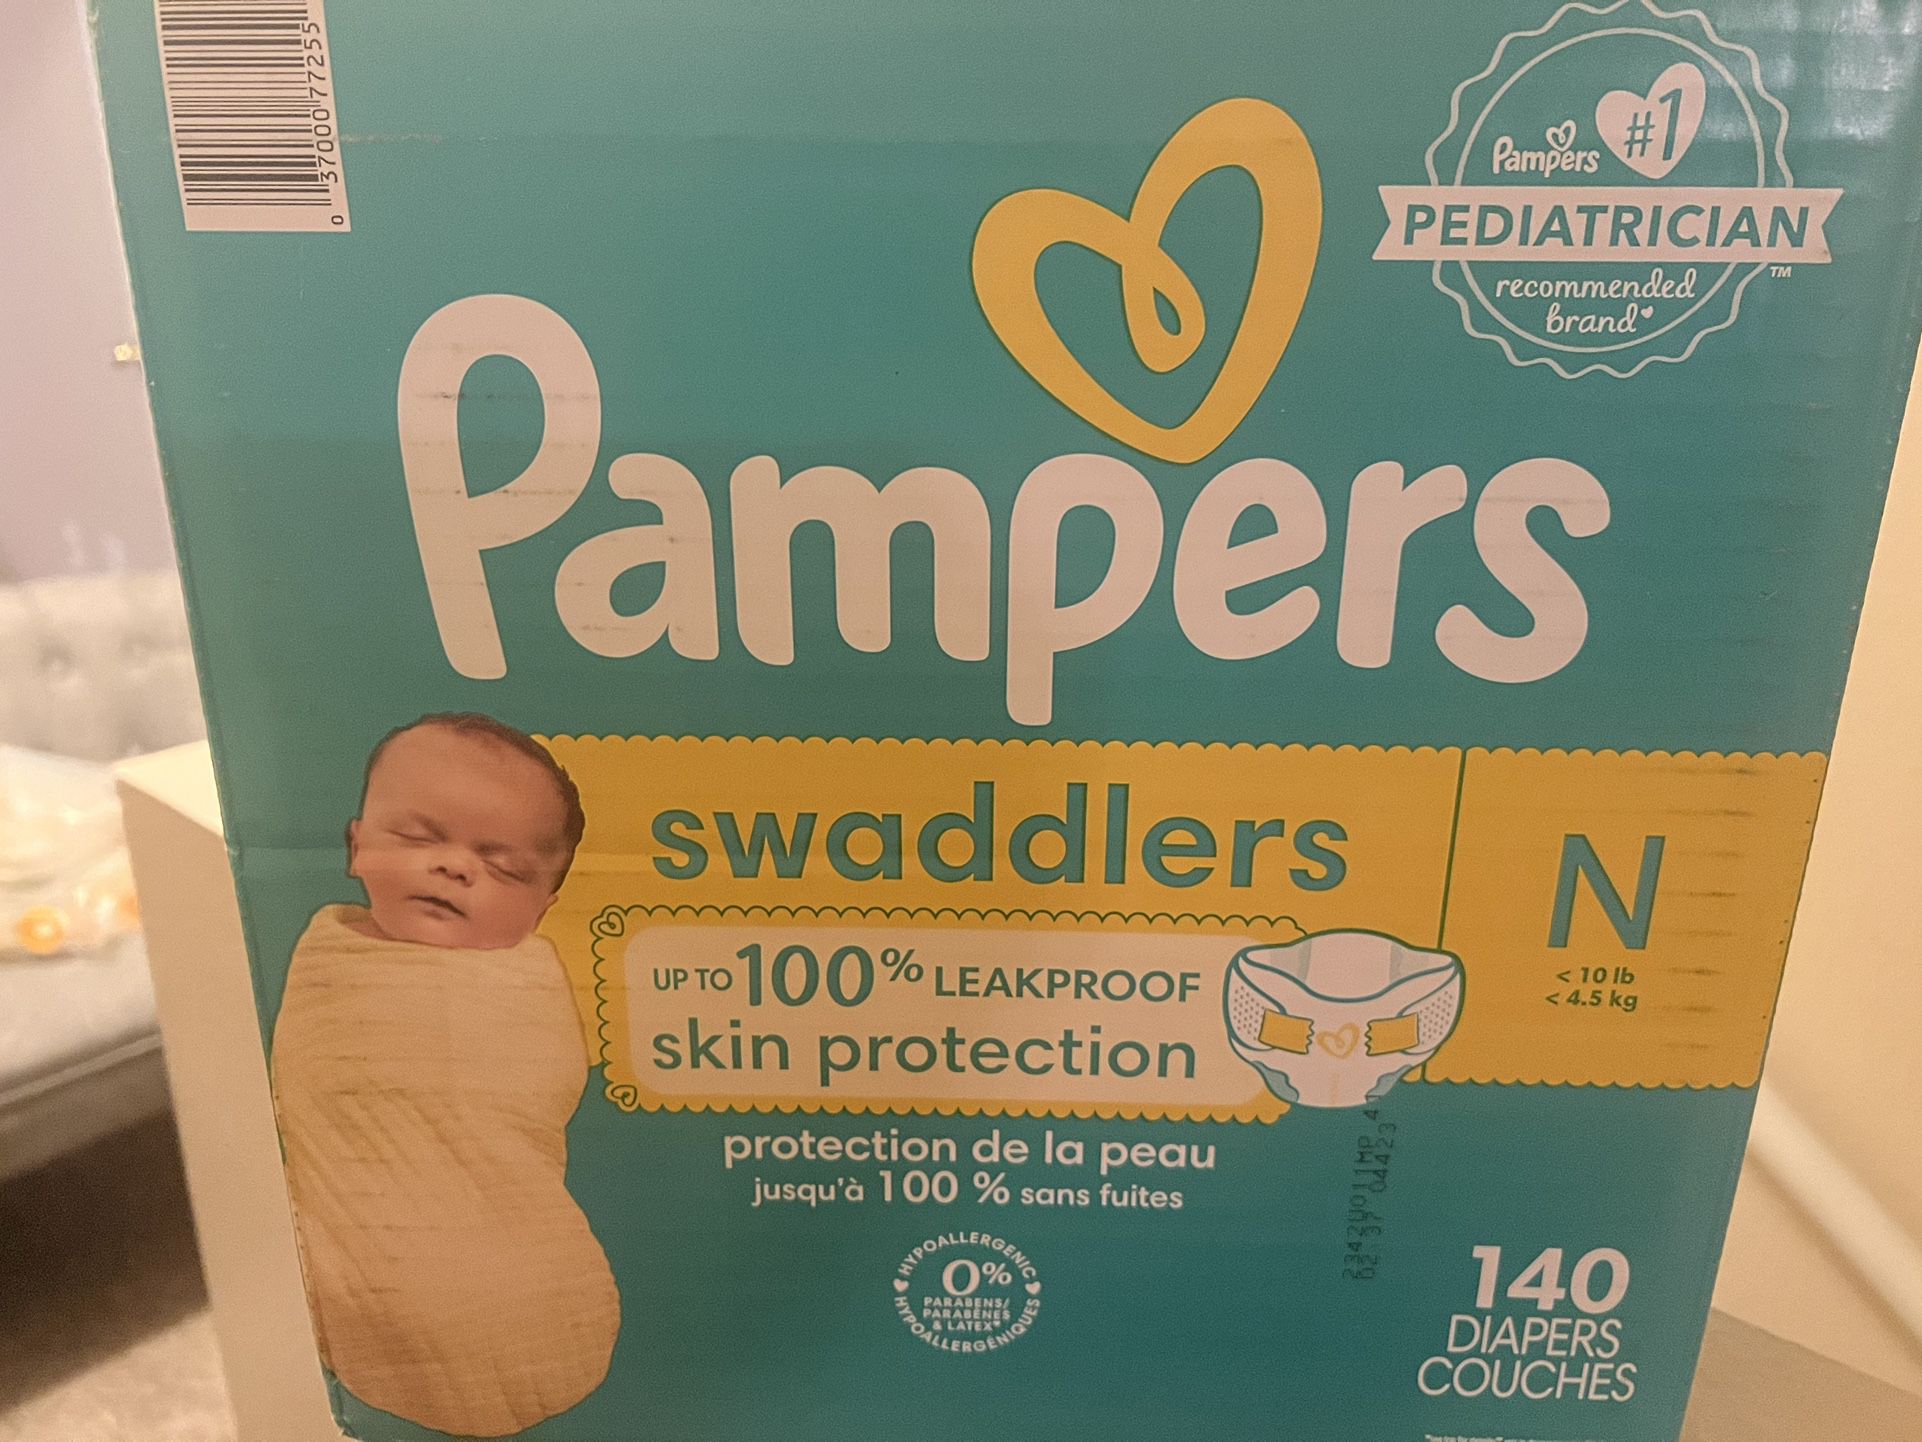 Pampers Swaddlers (Newborn Size)